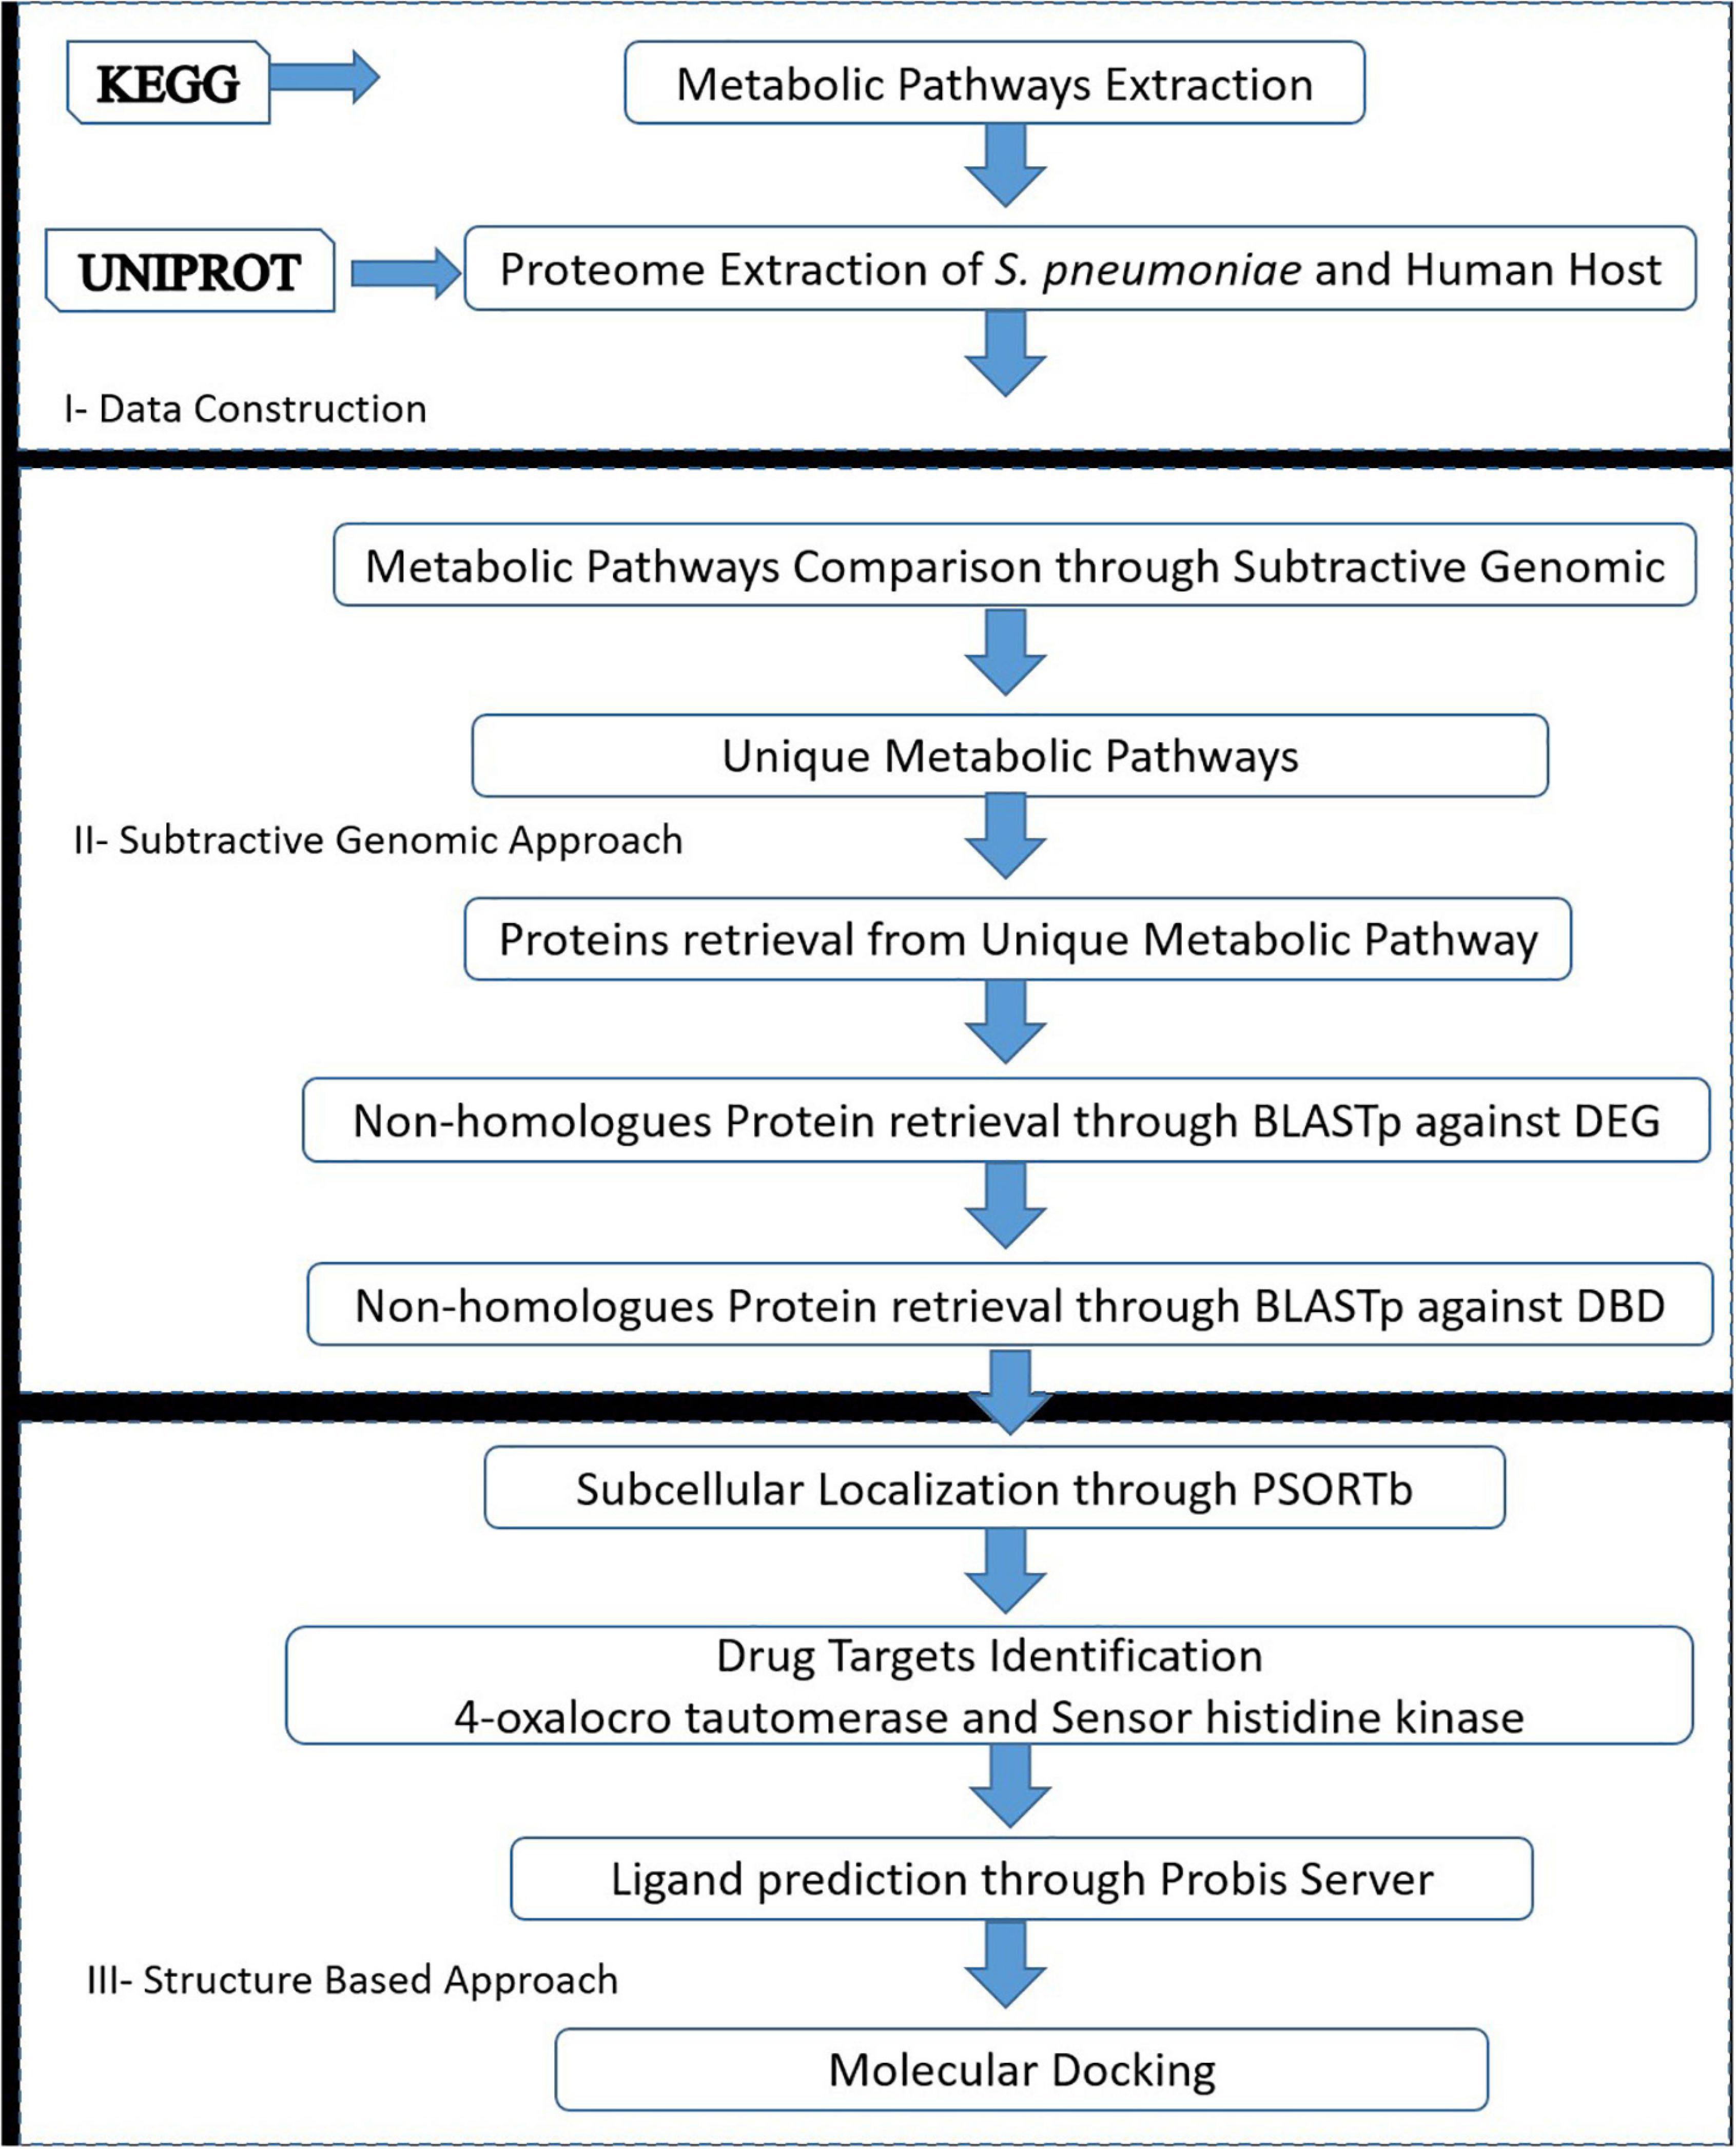 Frontiers Comparative Metabolic Pathways Analysis And Subtractive Genomics Profiling To Prioritize Potential Drug Targets Against Streptococcus Pneumoniae